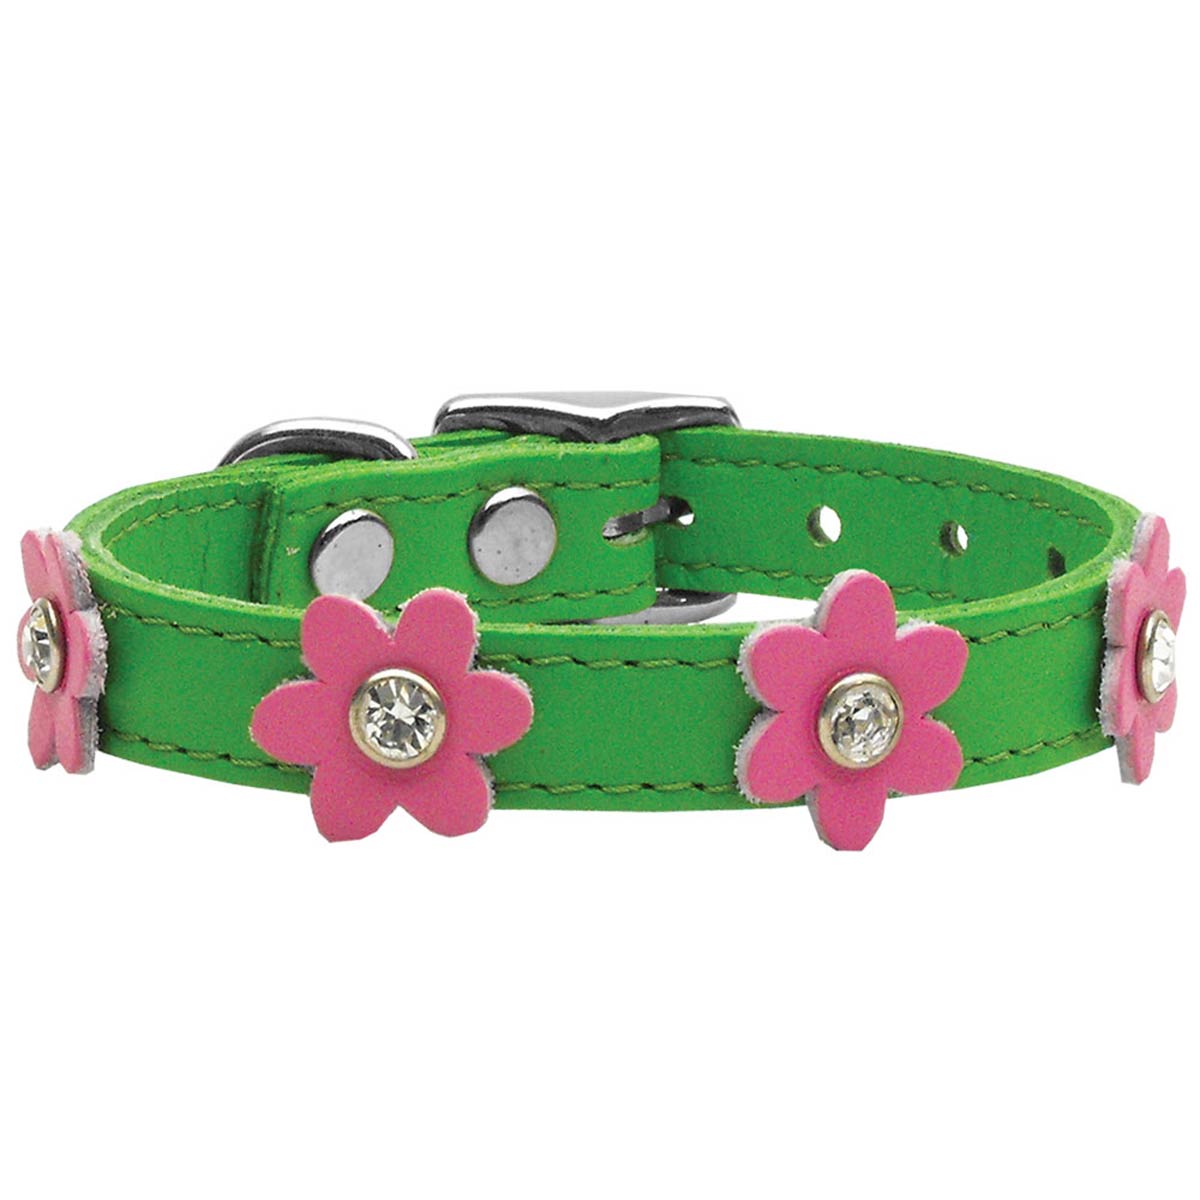 Flower Emerald Green Leather Dog Collar - Pink Flowers